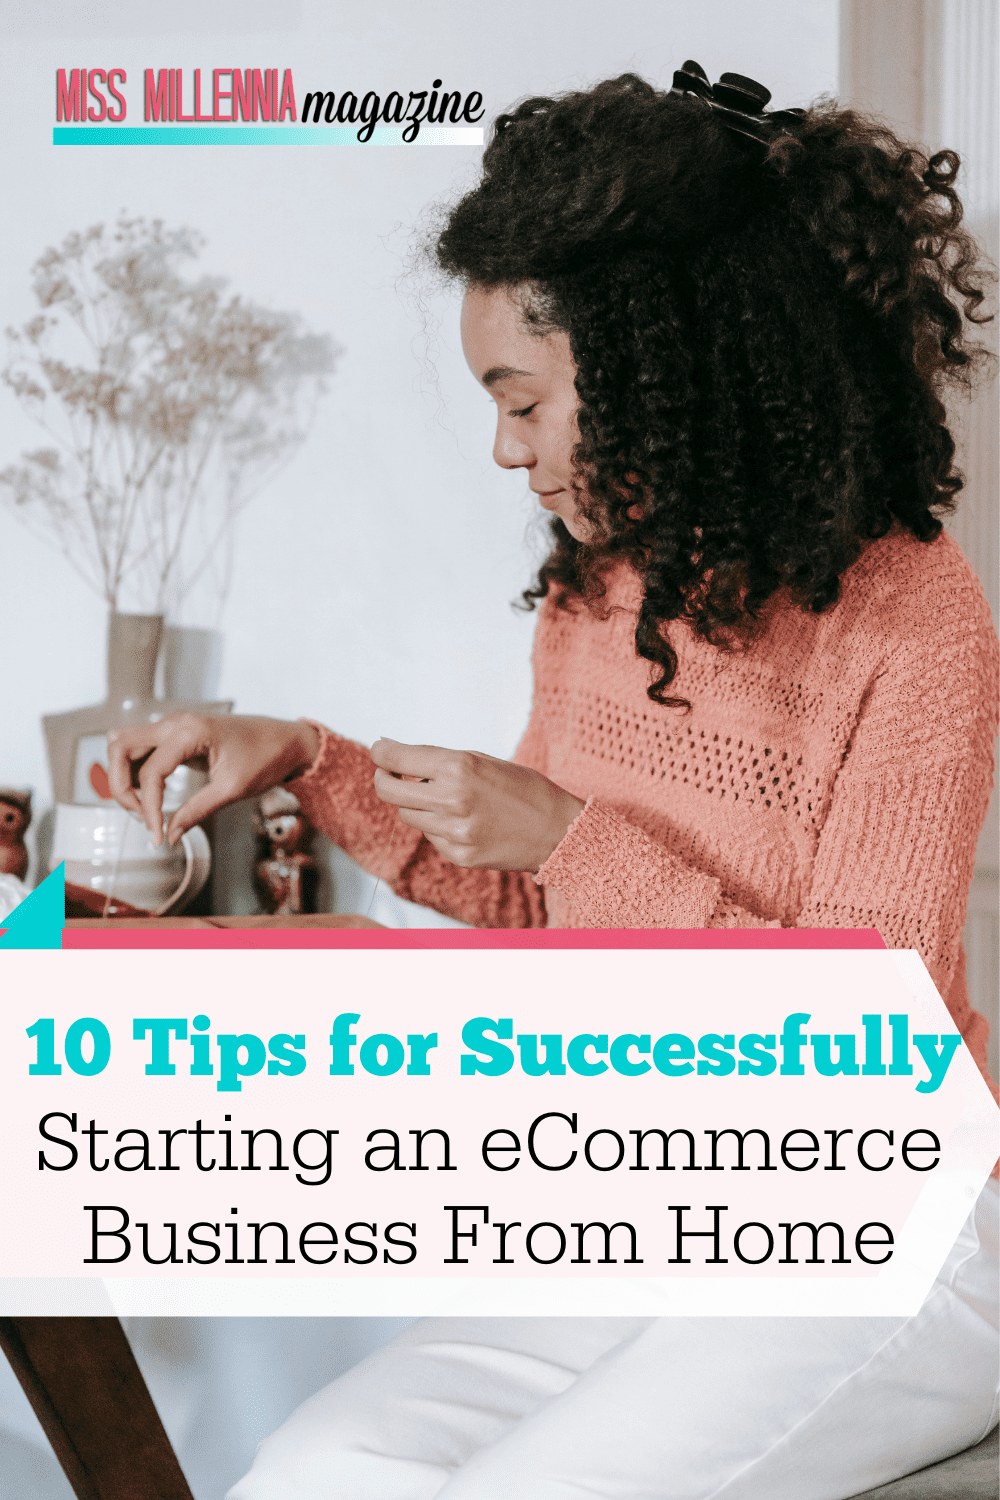 10 Tips for Successfully Starting an eCommerce Business From Home